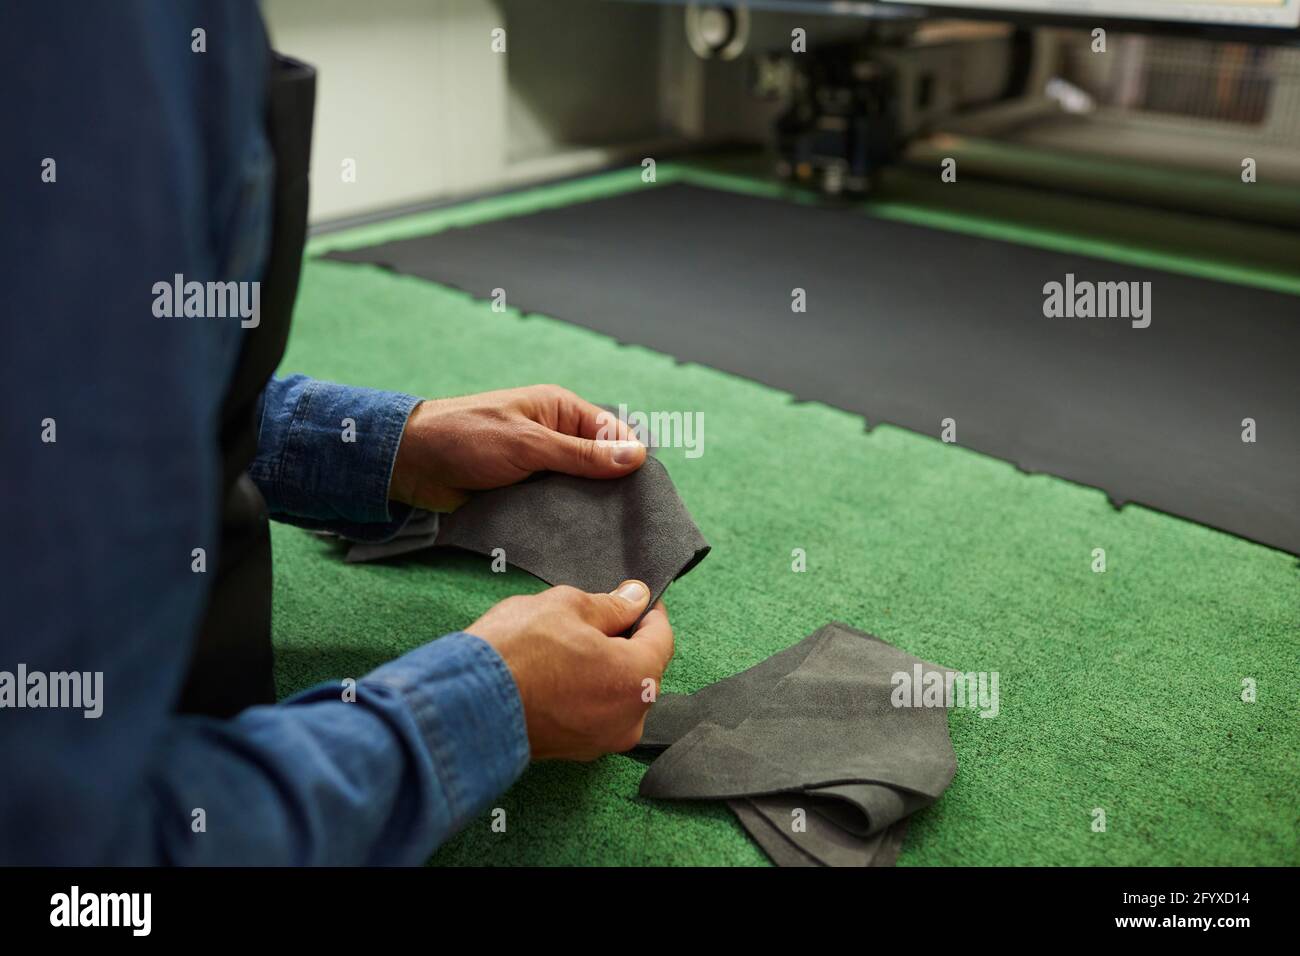 Shoemaker hand cutting leather for shoe making skin patterns crop image Stock Photo